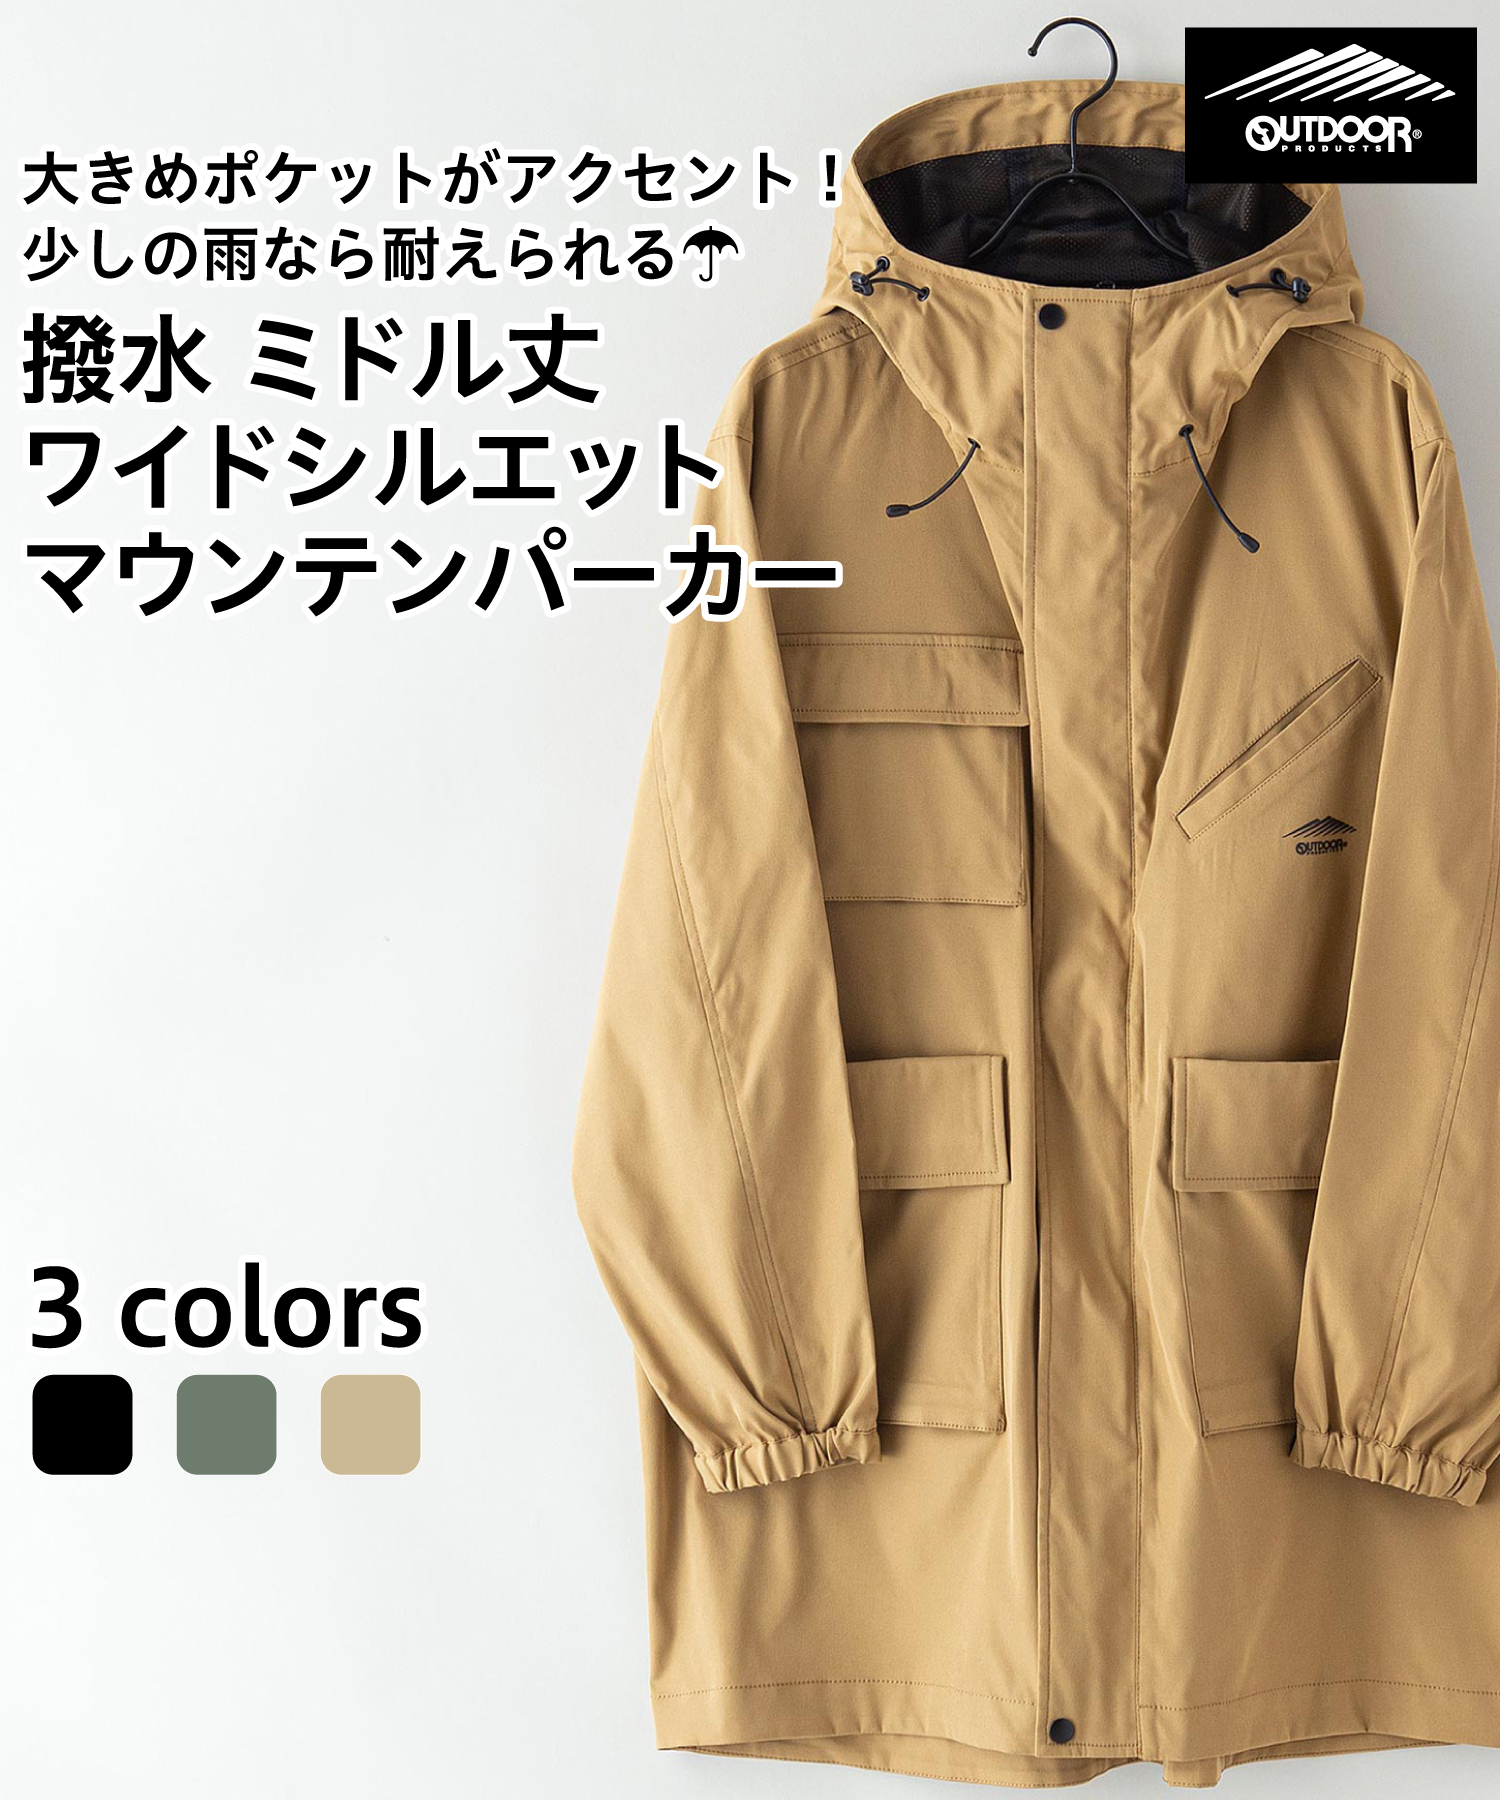 OUTDOORPRODUCTS】撥水ミドル丈 マウンテンパーカー ４ポケット(504553918) | ジーンズメイト(JEANS MATE) -  MAGASEEK